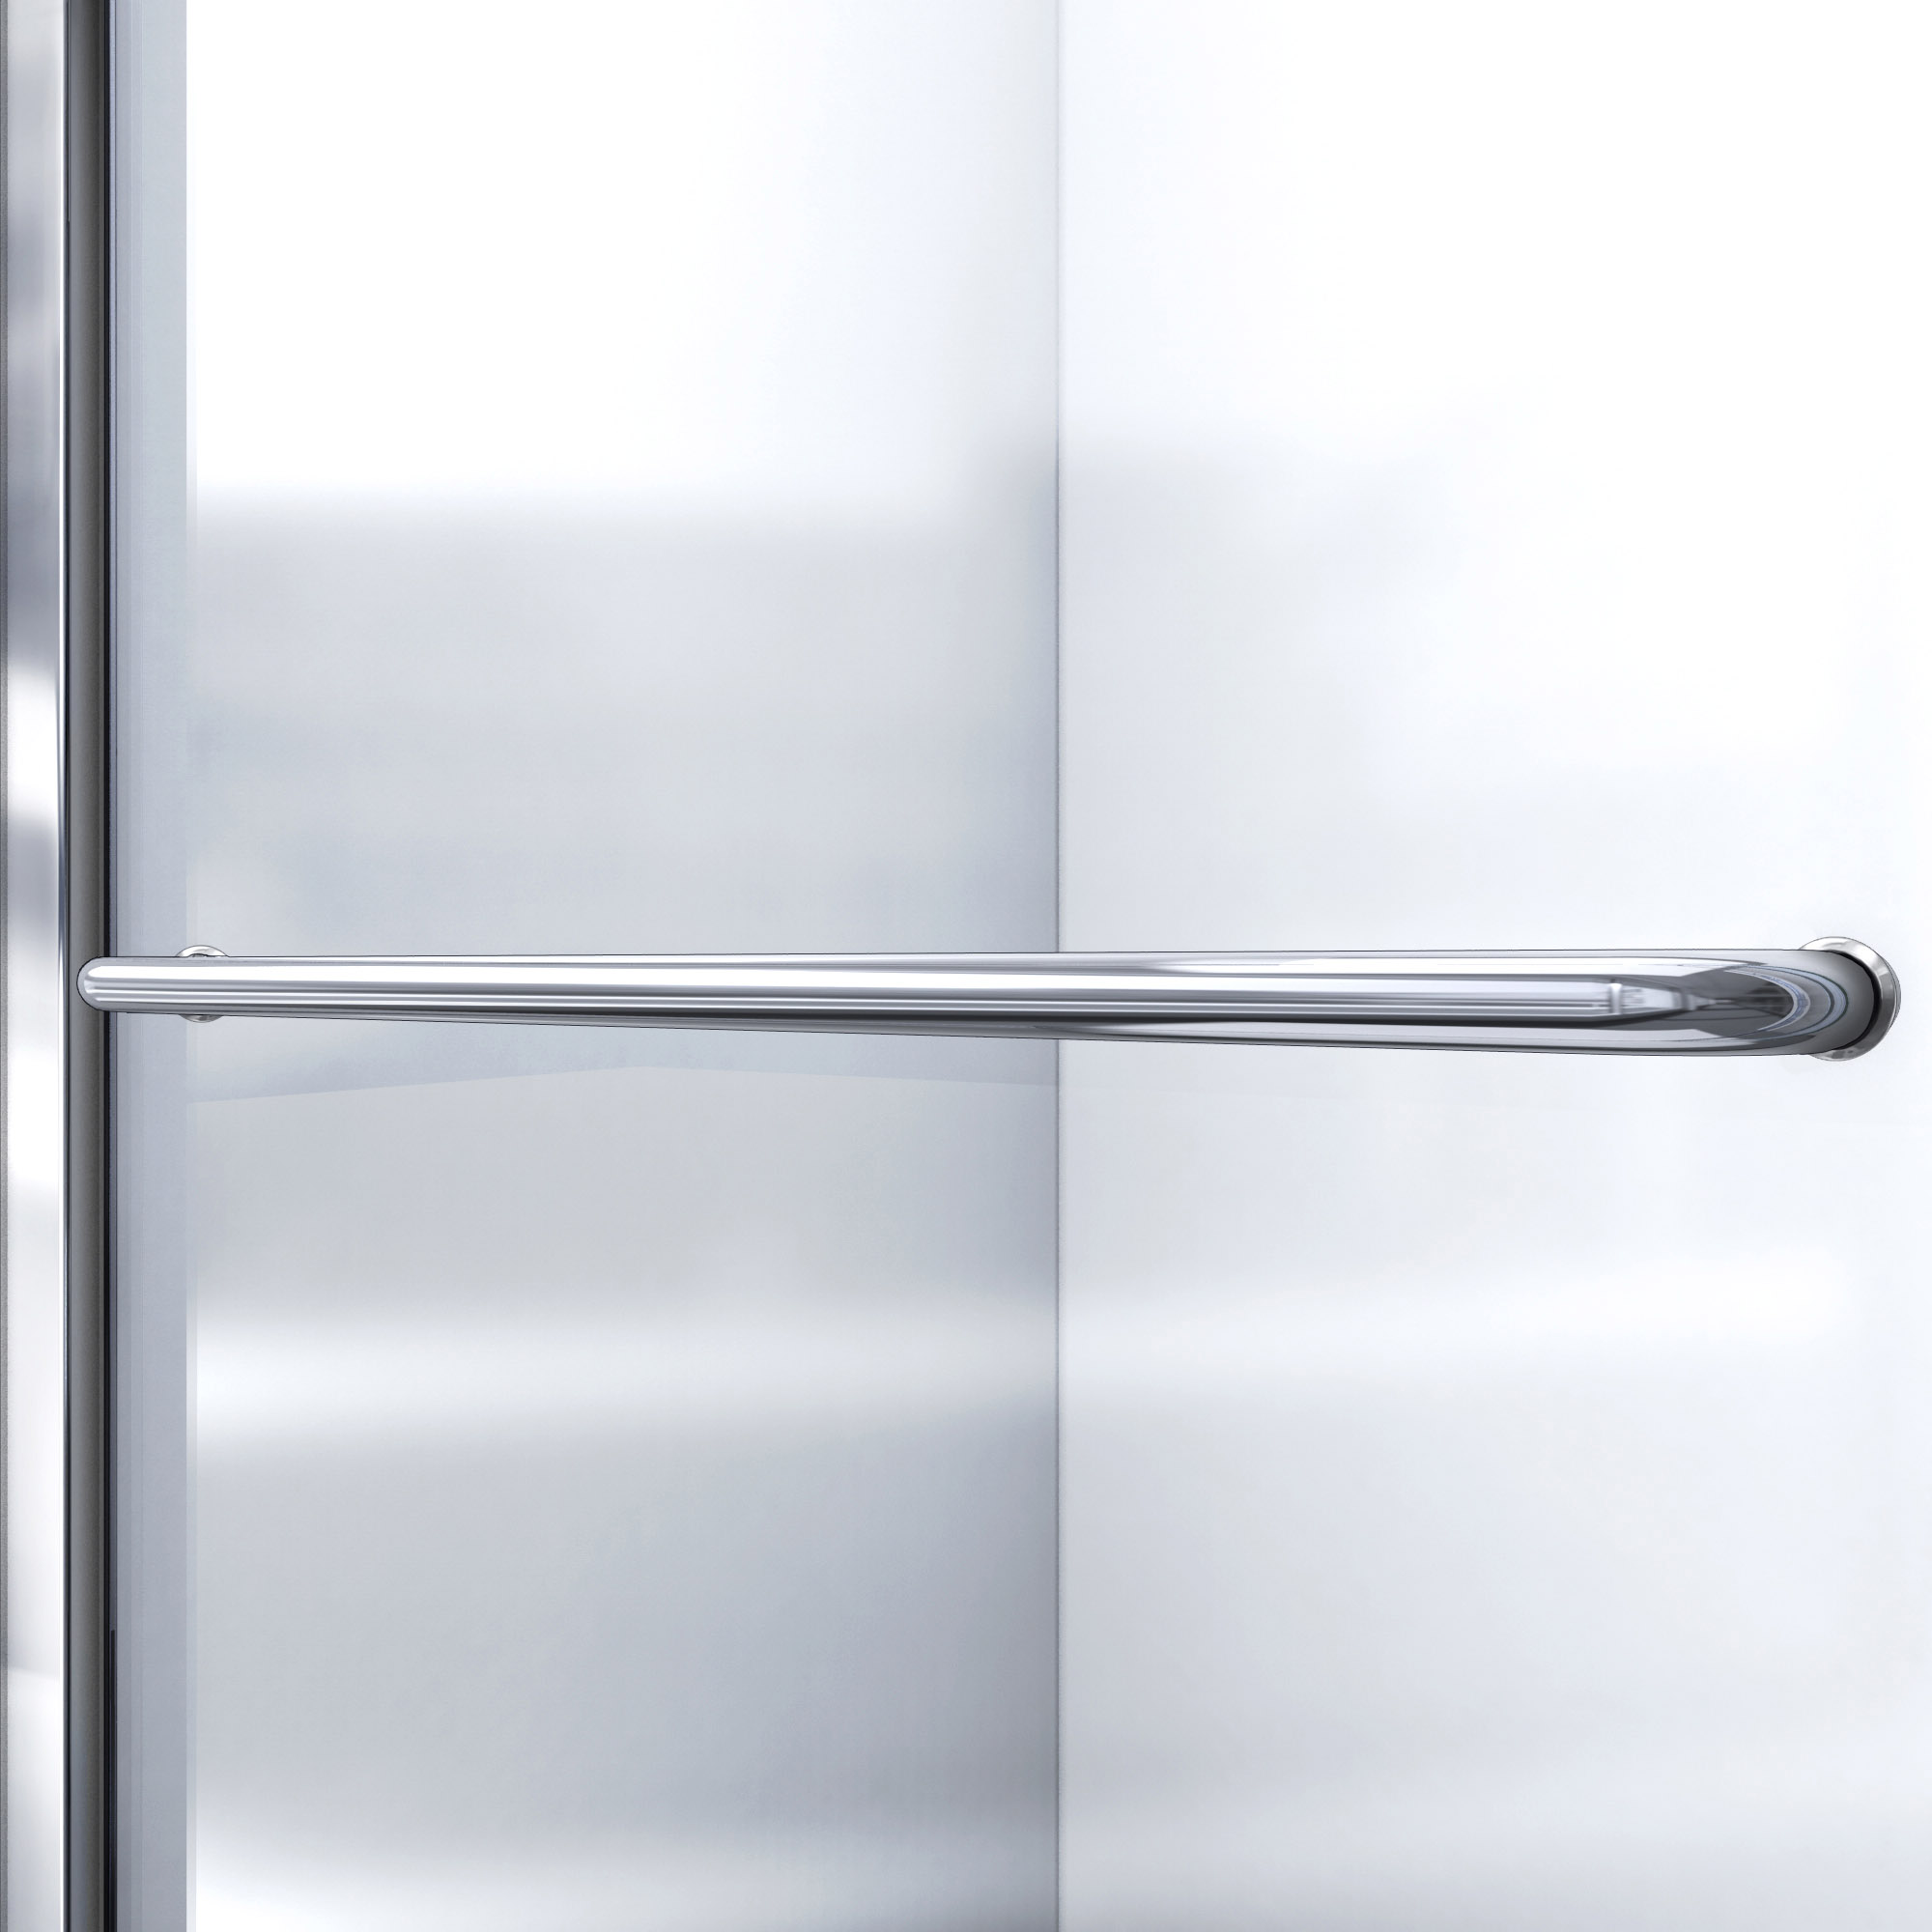 DreamLine Infinity-Z 56-60 in. W x 60 in. H Clear Sliding Tub Door in Brushed Nickel with White Acrylic Backwall Kit - image 8 of 14